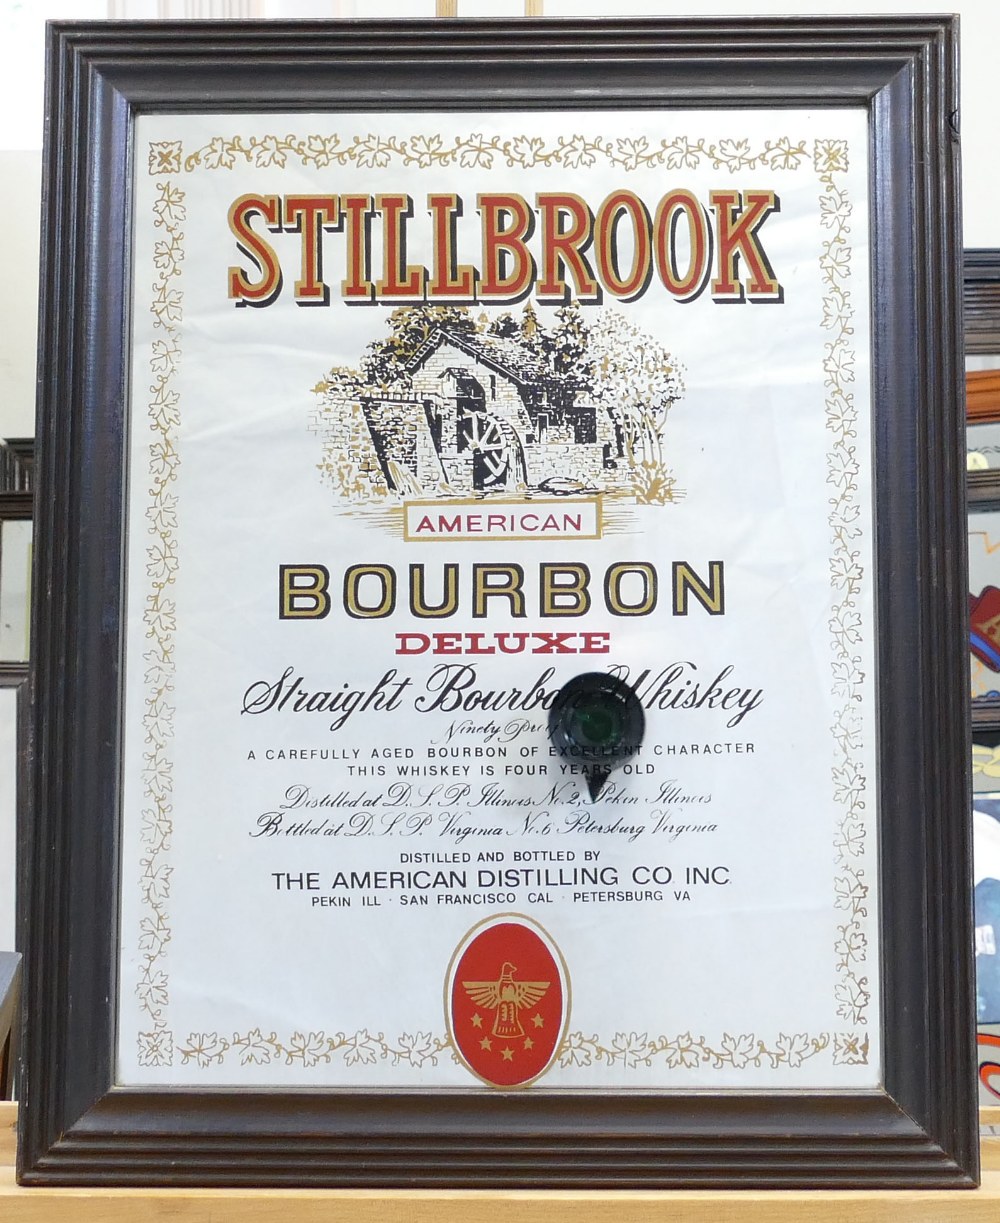 Vintage advertising mirrors for Stillbrook American Deluxe Bourbon and Bowies Rock and rye whisky, - Image 2 of 2